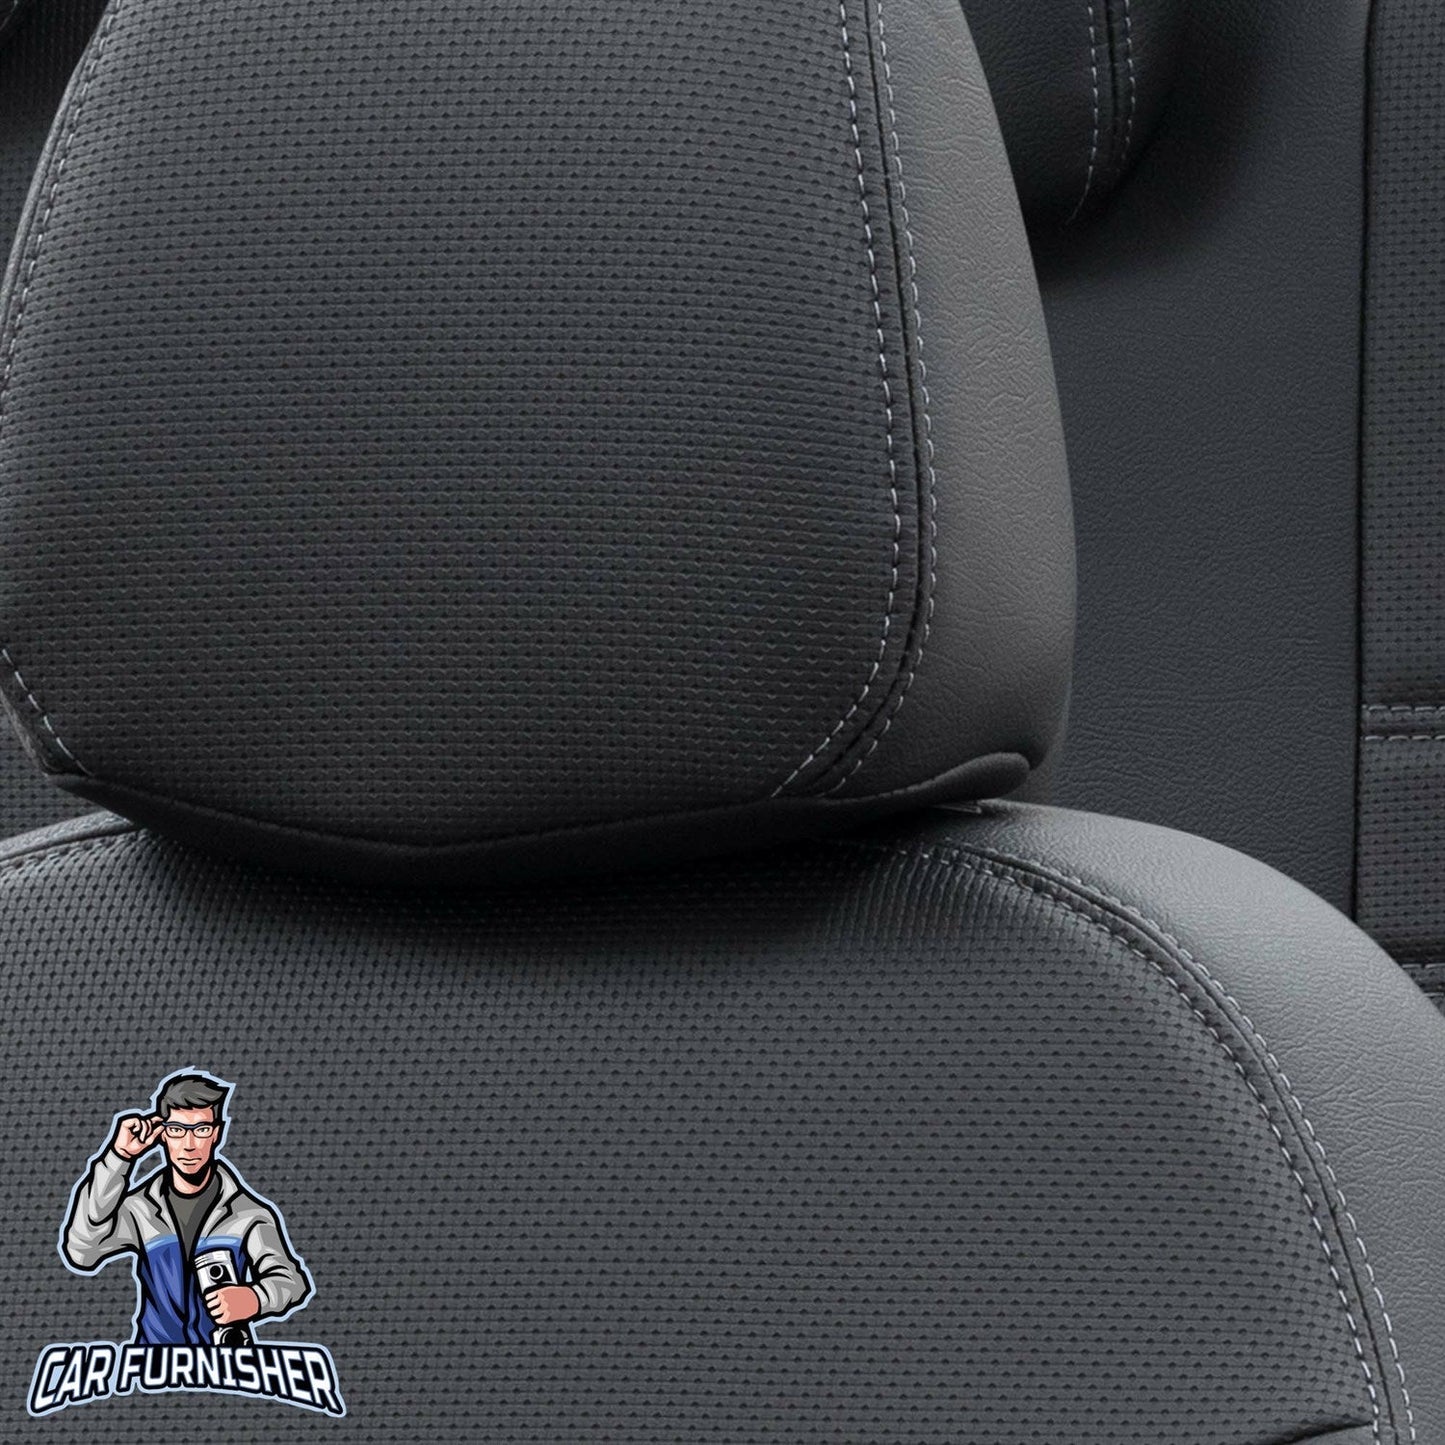 Seat Alhambra Seat Covers New York Leather Design Black Leather